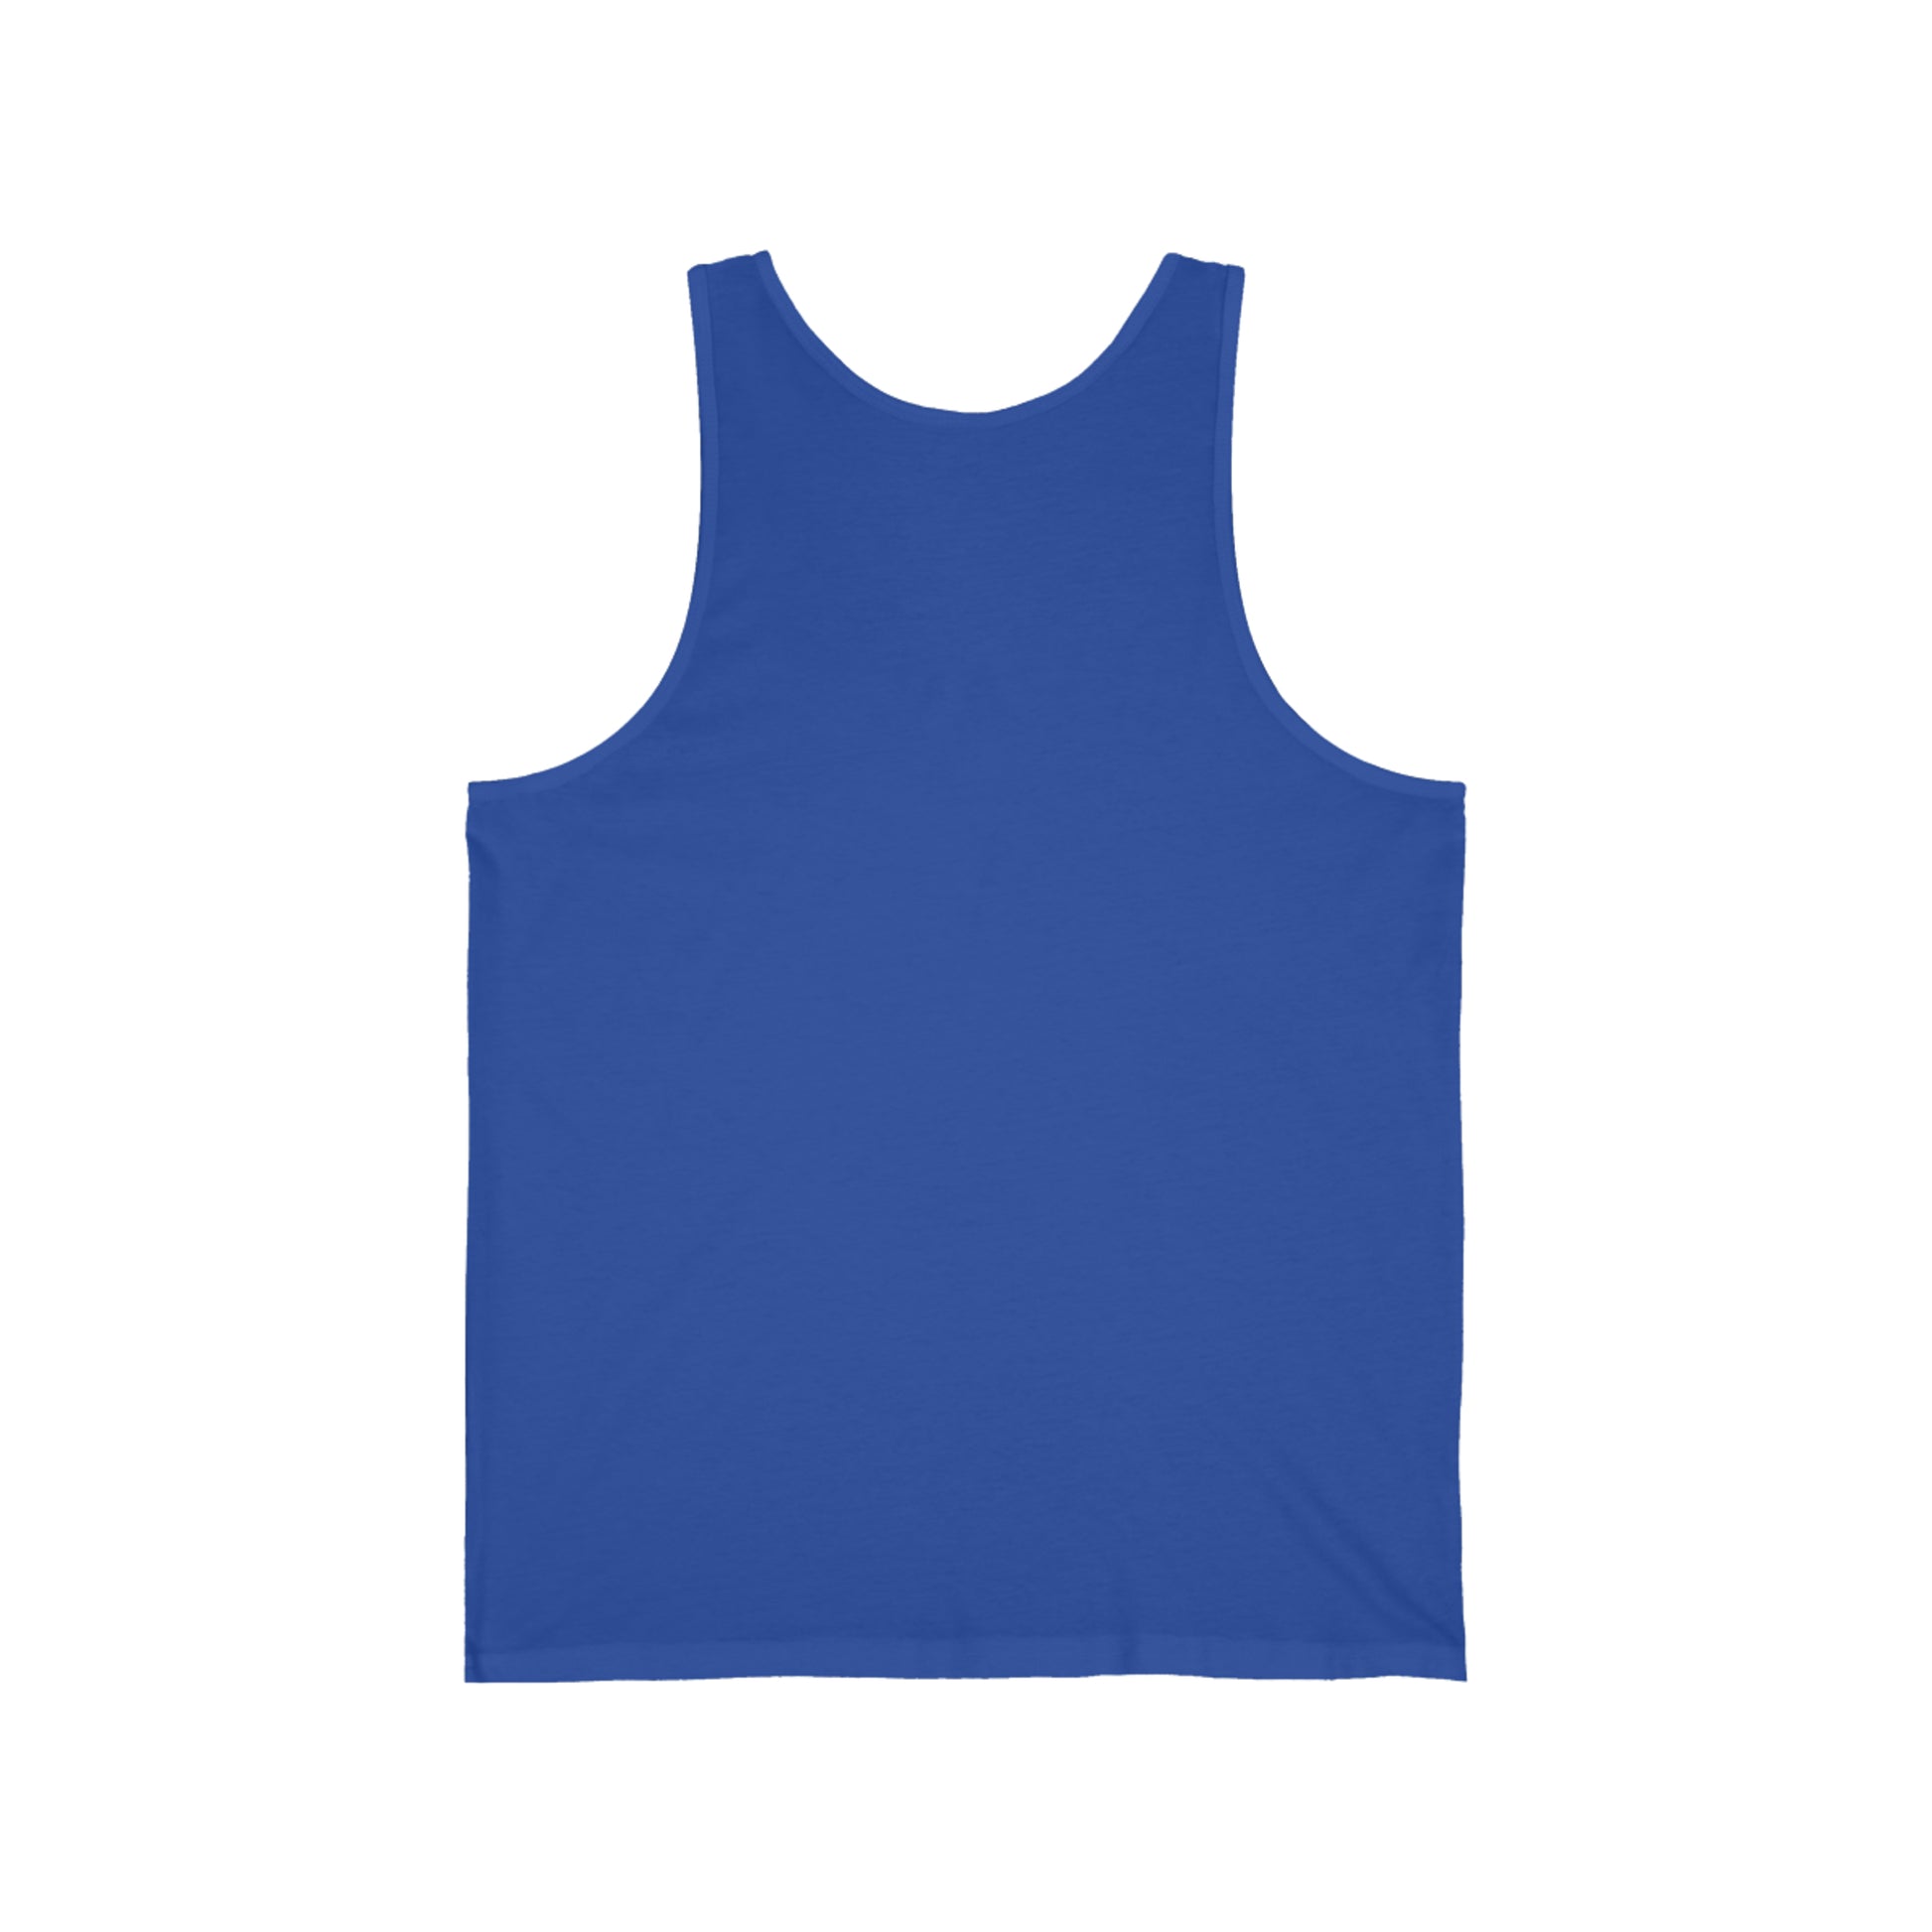 A plain royal blue Unisex Jersey Tank by Printify on a white background, featuring the word "Toronto" across the chest. The tank top is sleeveless with a round neckline and is displayed from the front view.